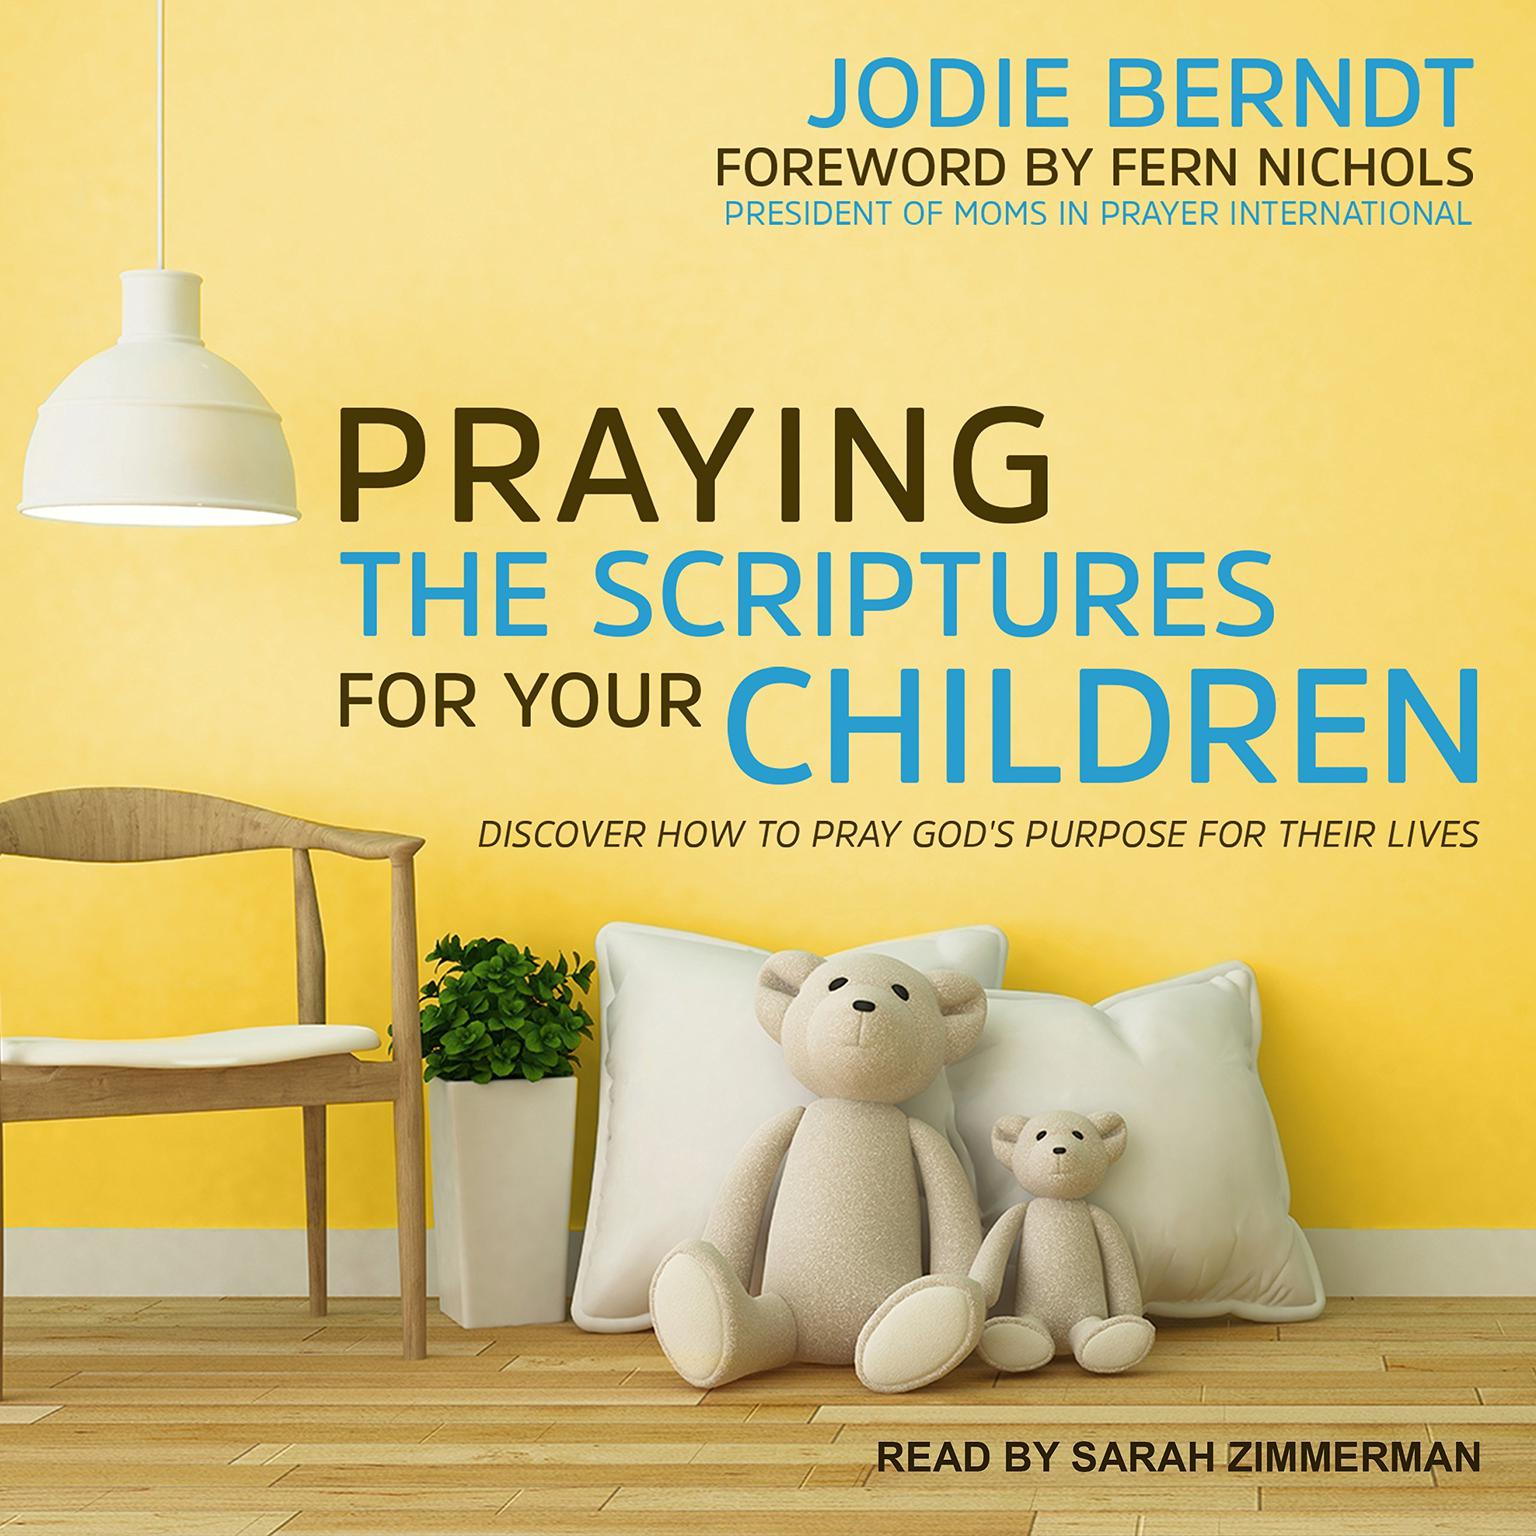 Praying the Scriptures for Your Children: Discover How to Pray Gods Purpose for Their Lives Audiobook, by Jodie Berndt